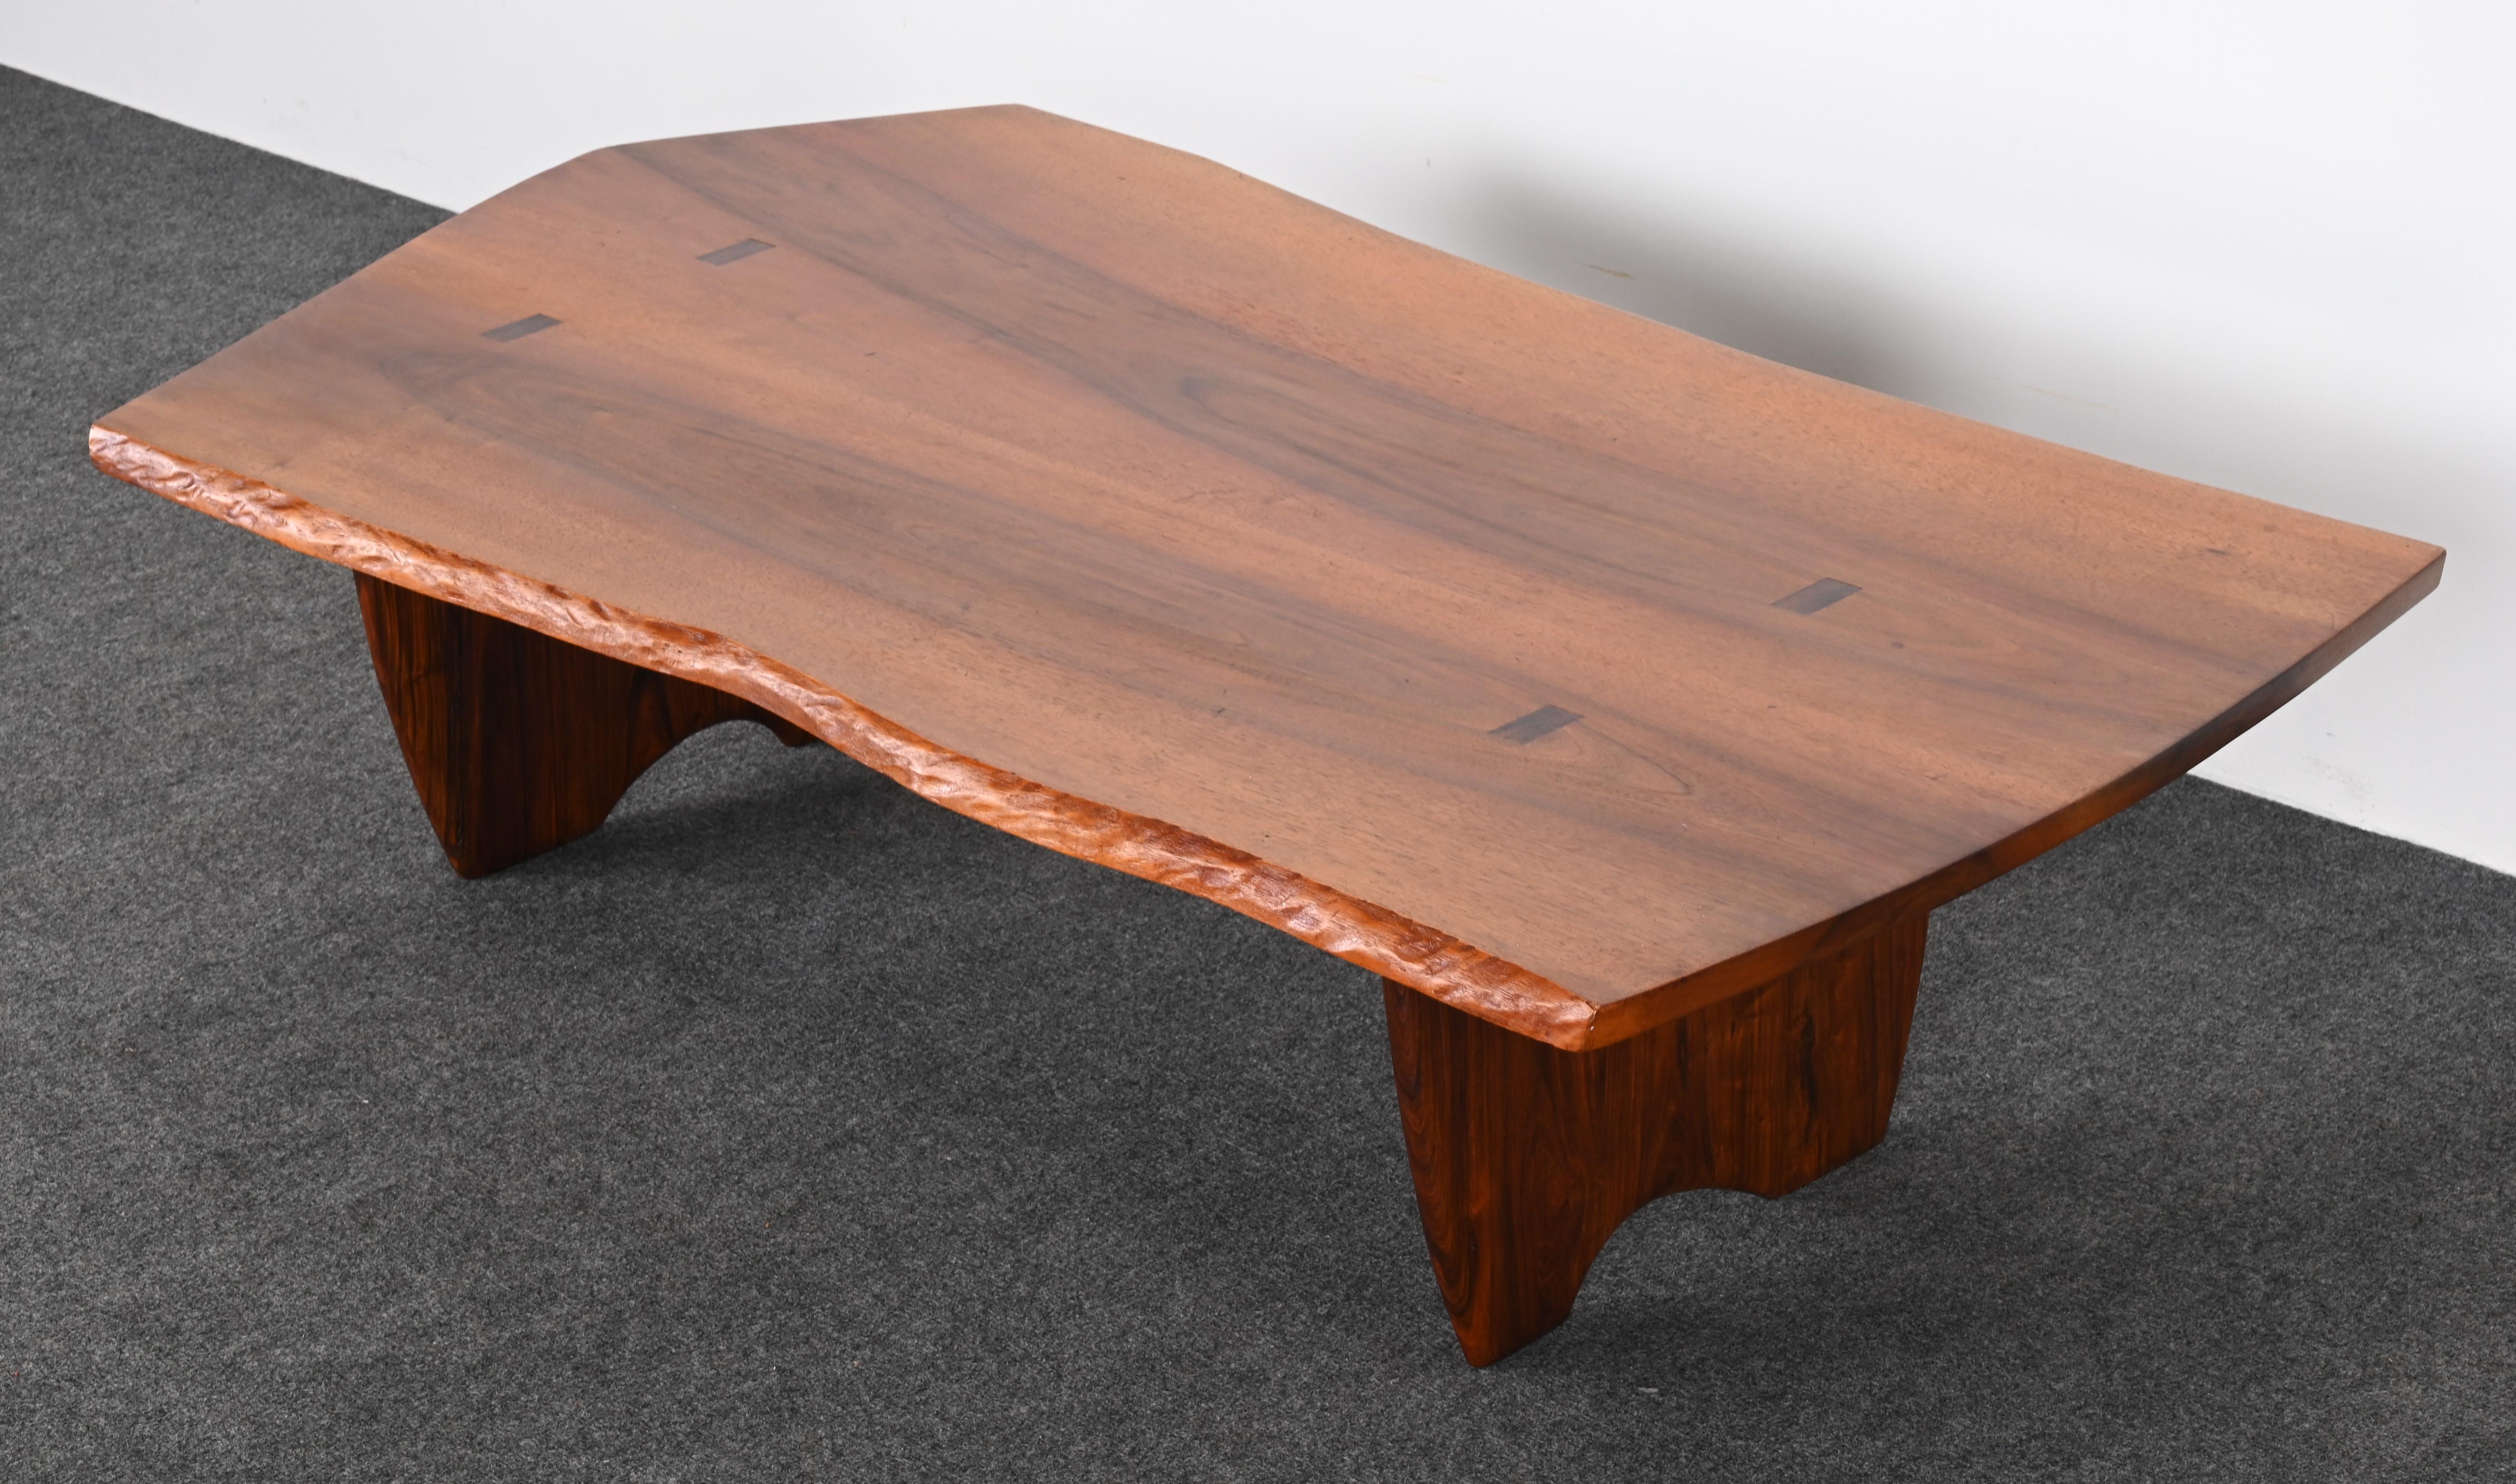 Live Edge Solid Walnut and Rosewood Coffee Table by Richard Rothbard, 1968 For Sale 13